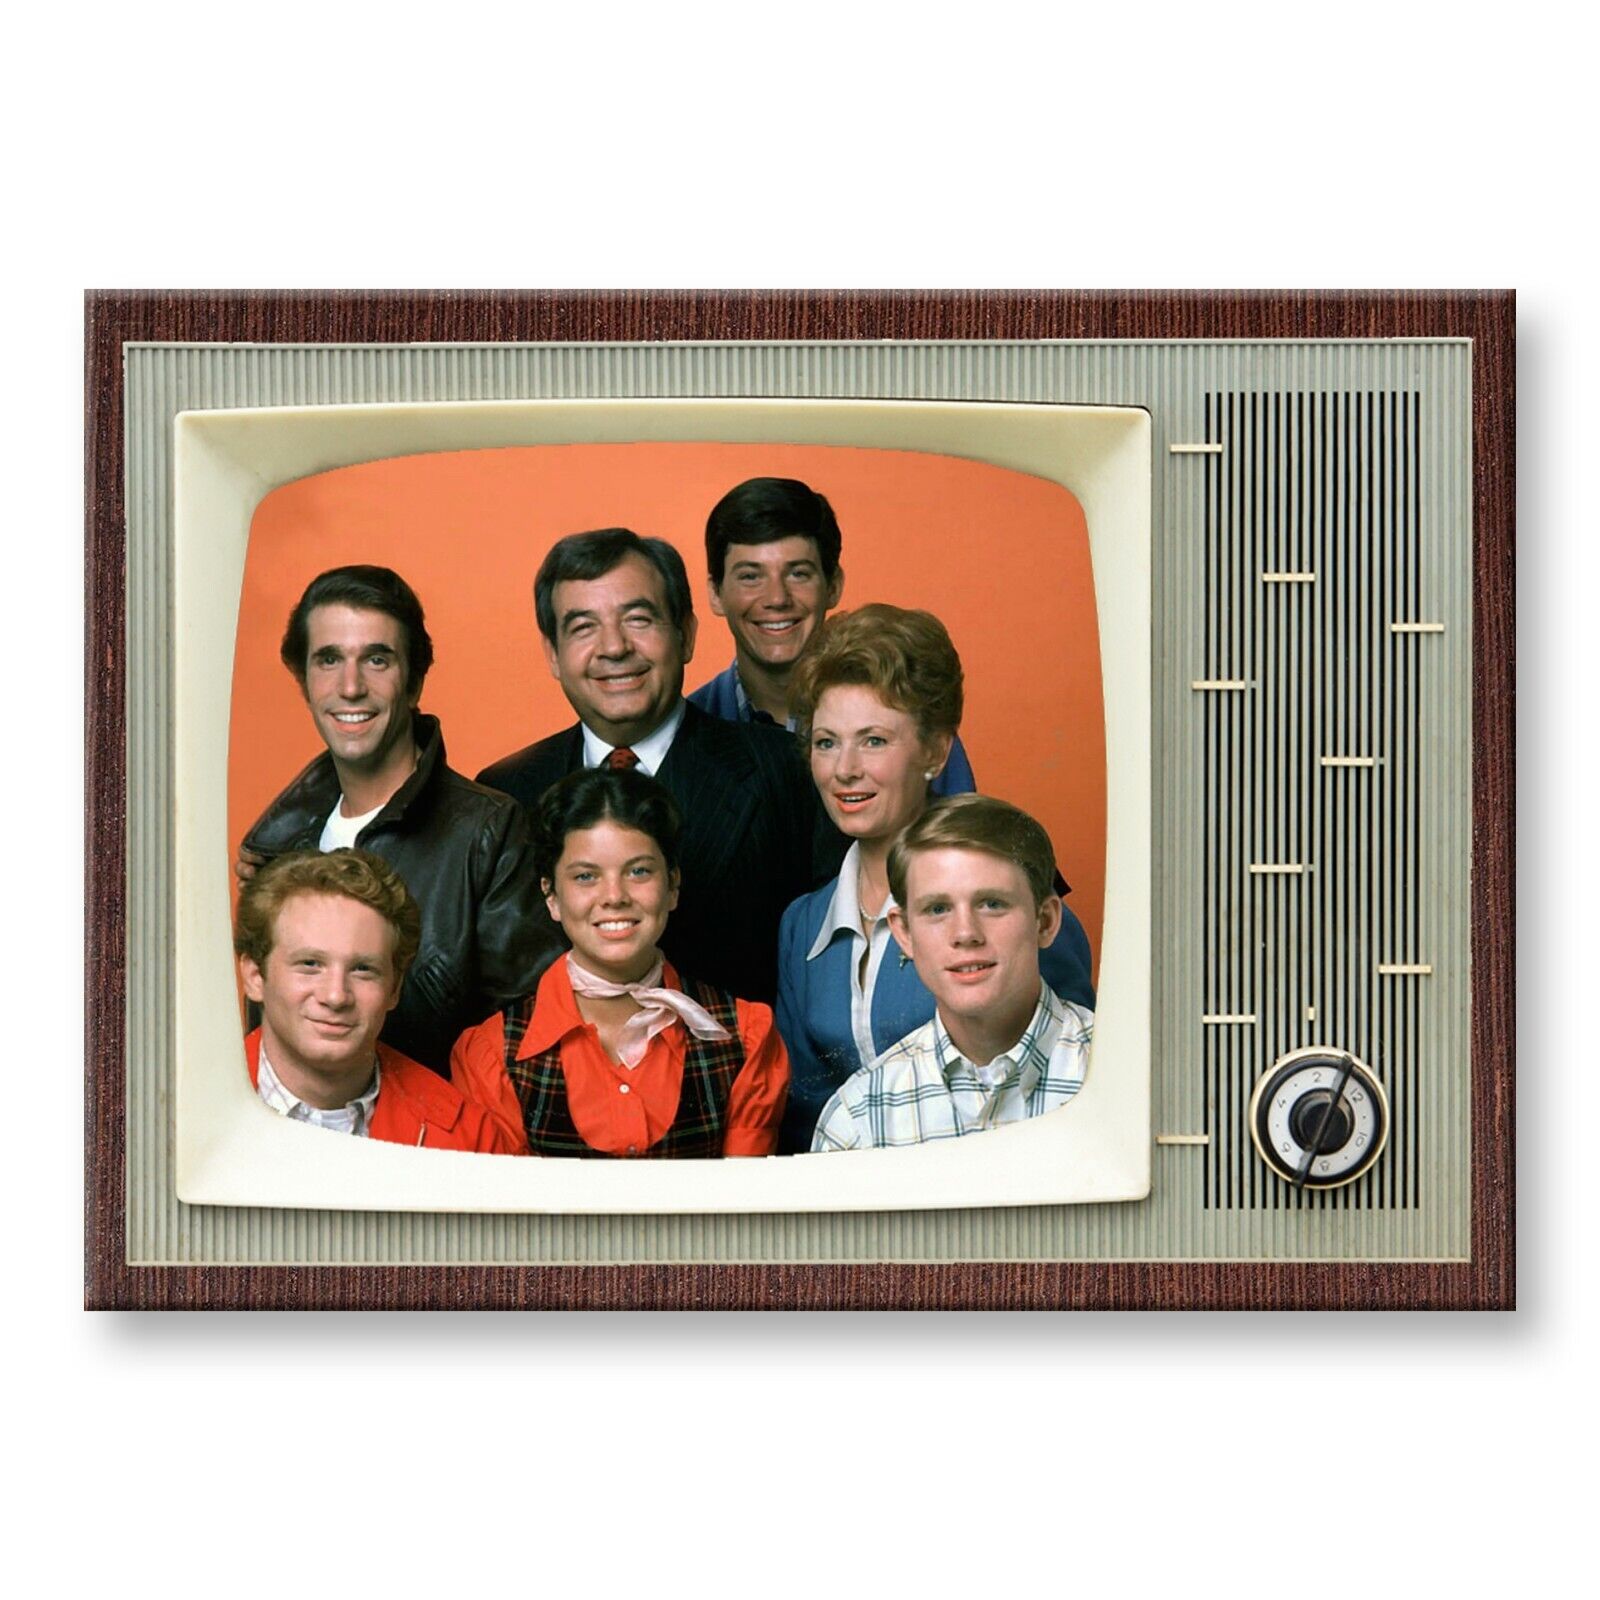 HAPPY DAYS TV Show Classic TV 3.5 inches x 2.5 inches Steel FRIDGE MAGNET